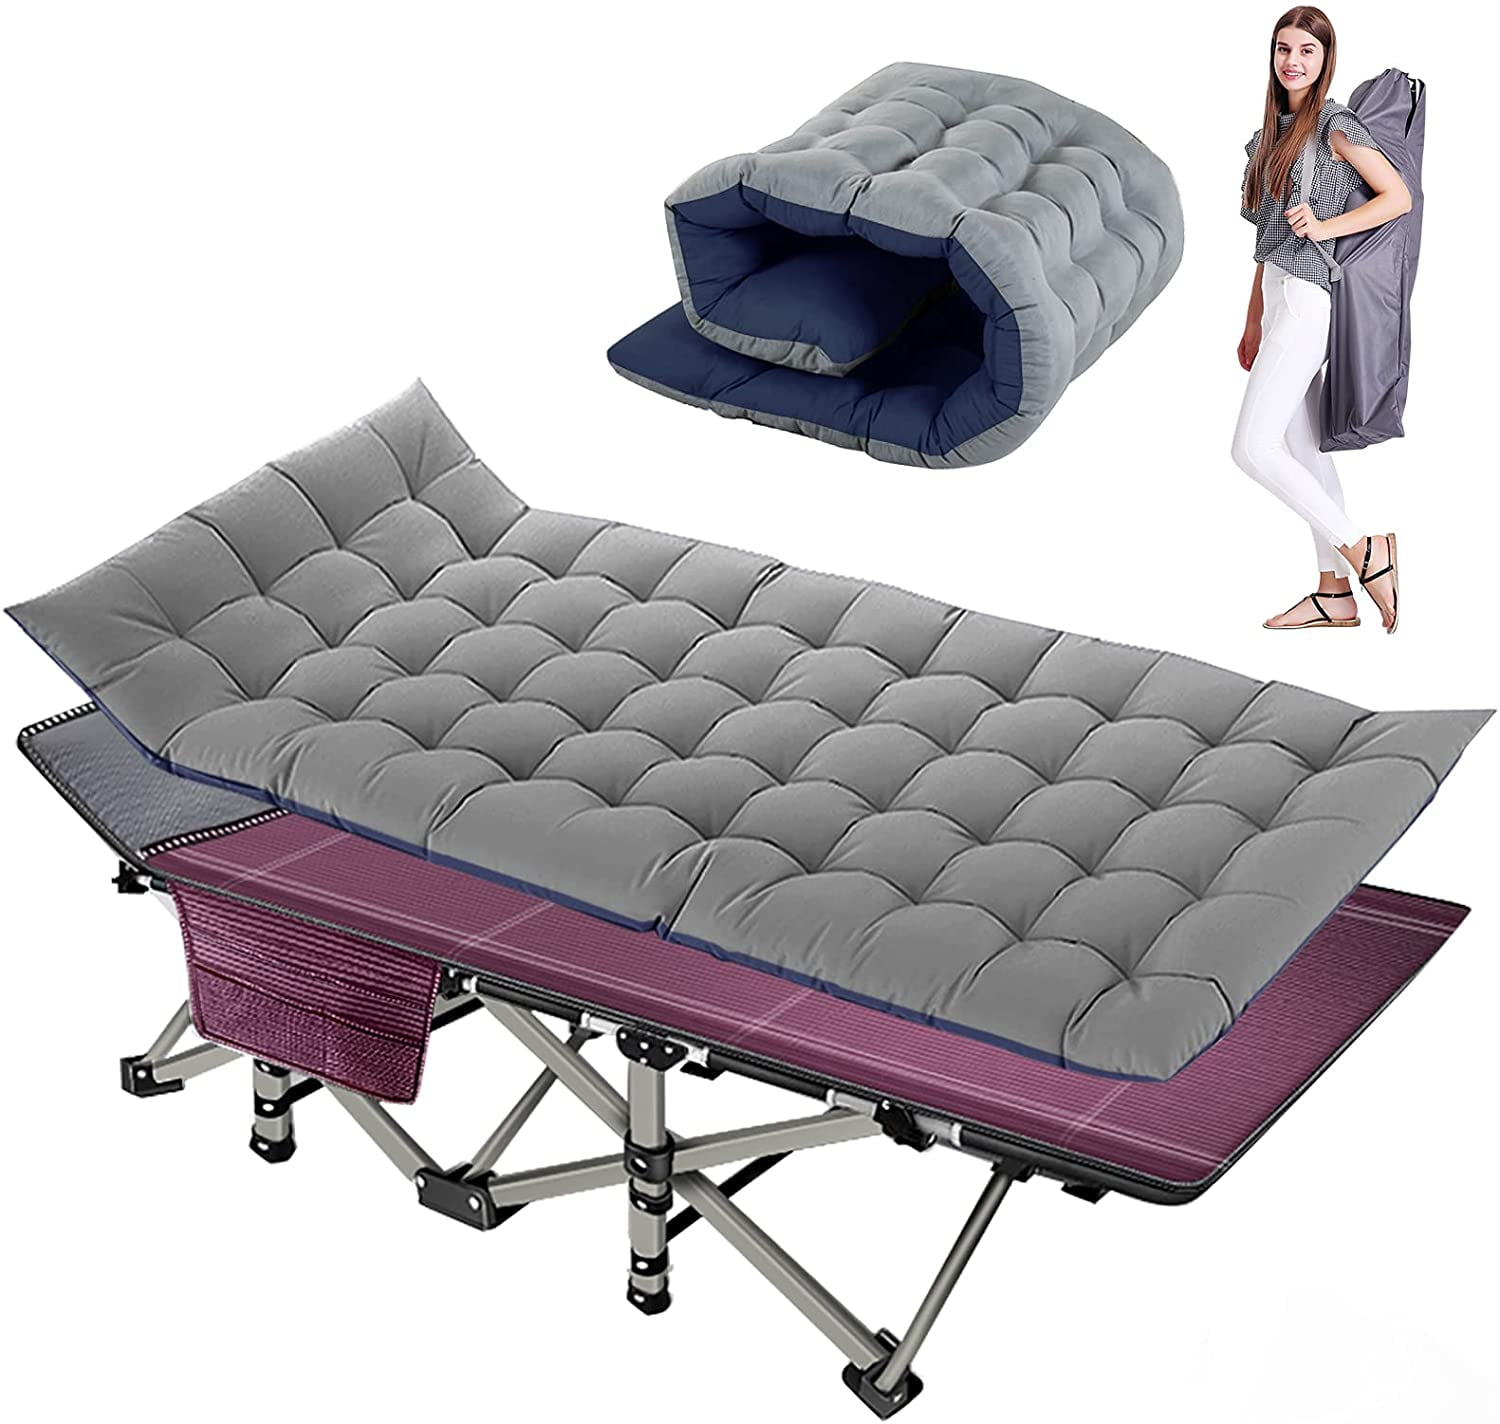 Folding Bed Camping Portable Cots Guest Beds Office Nap Support Up to 600LB+Bag 